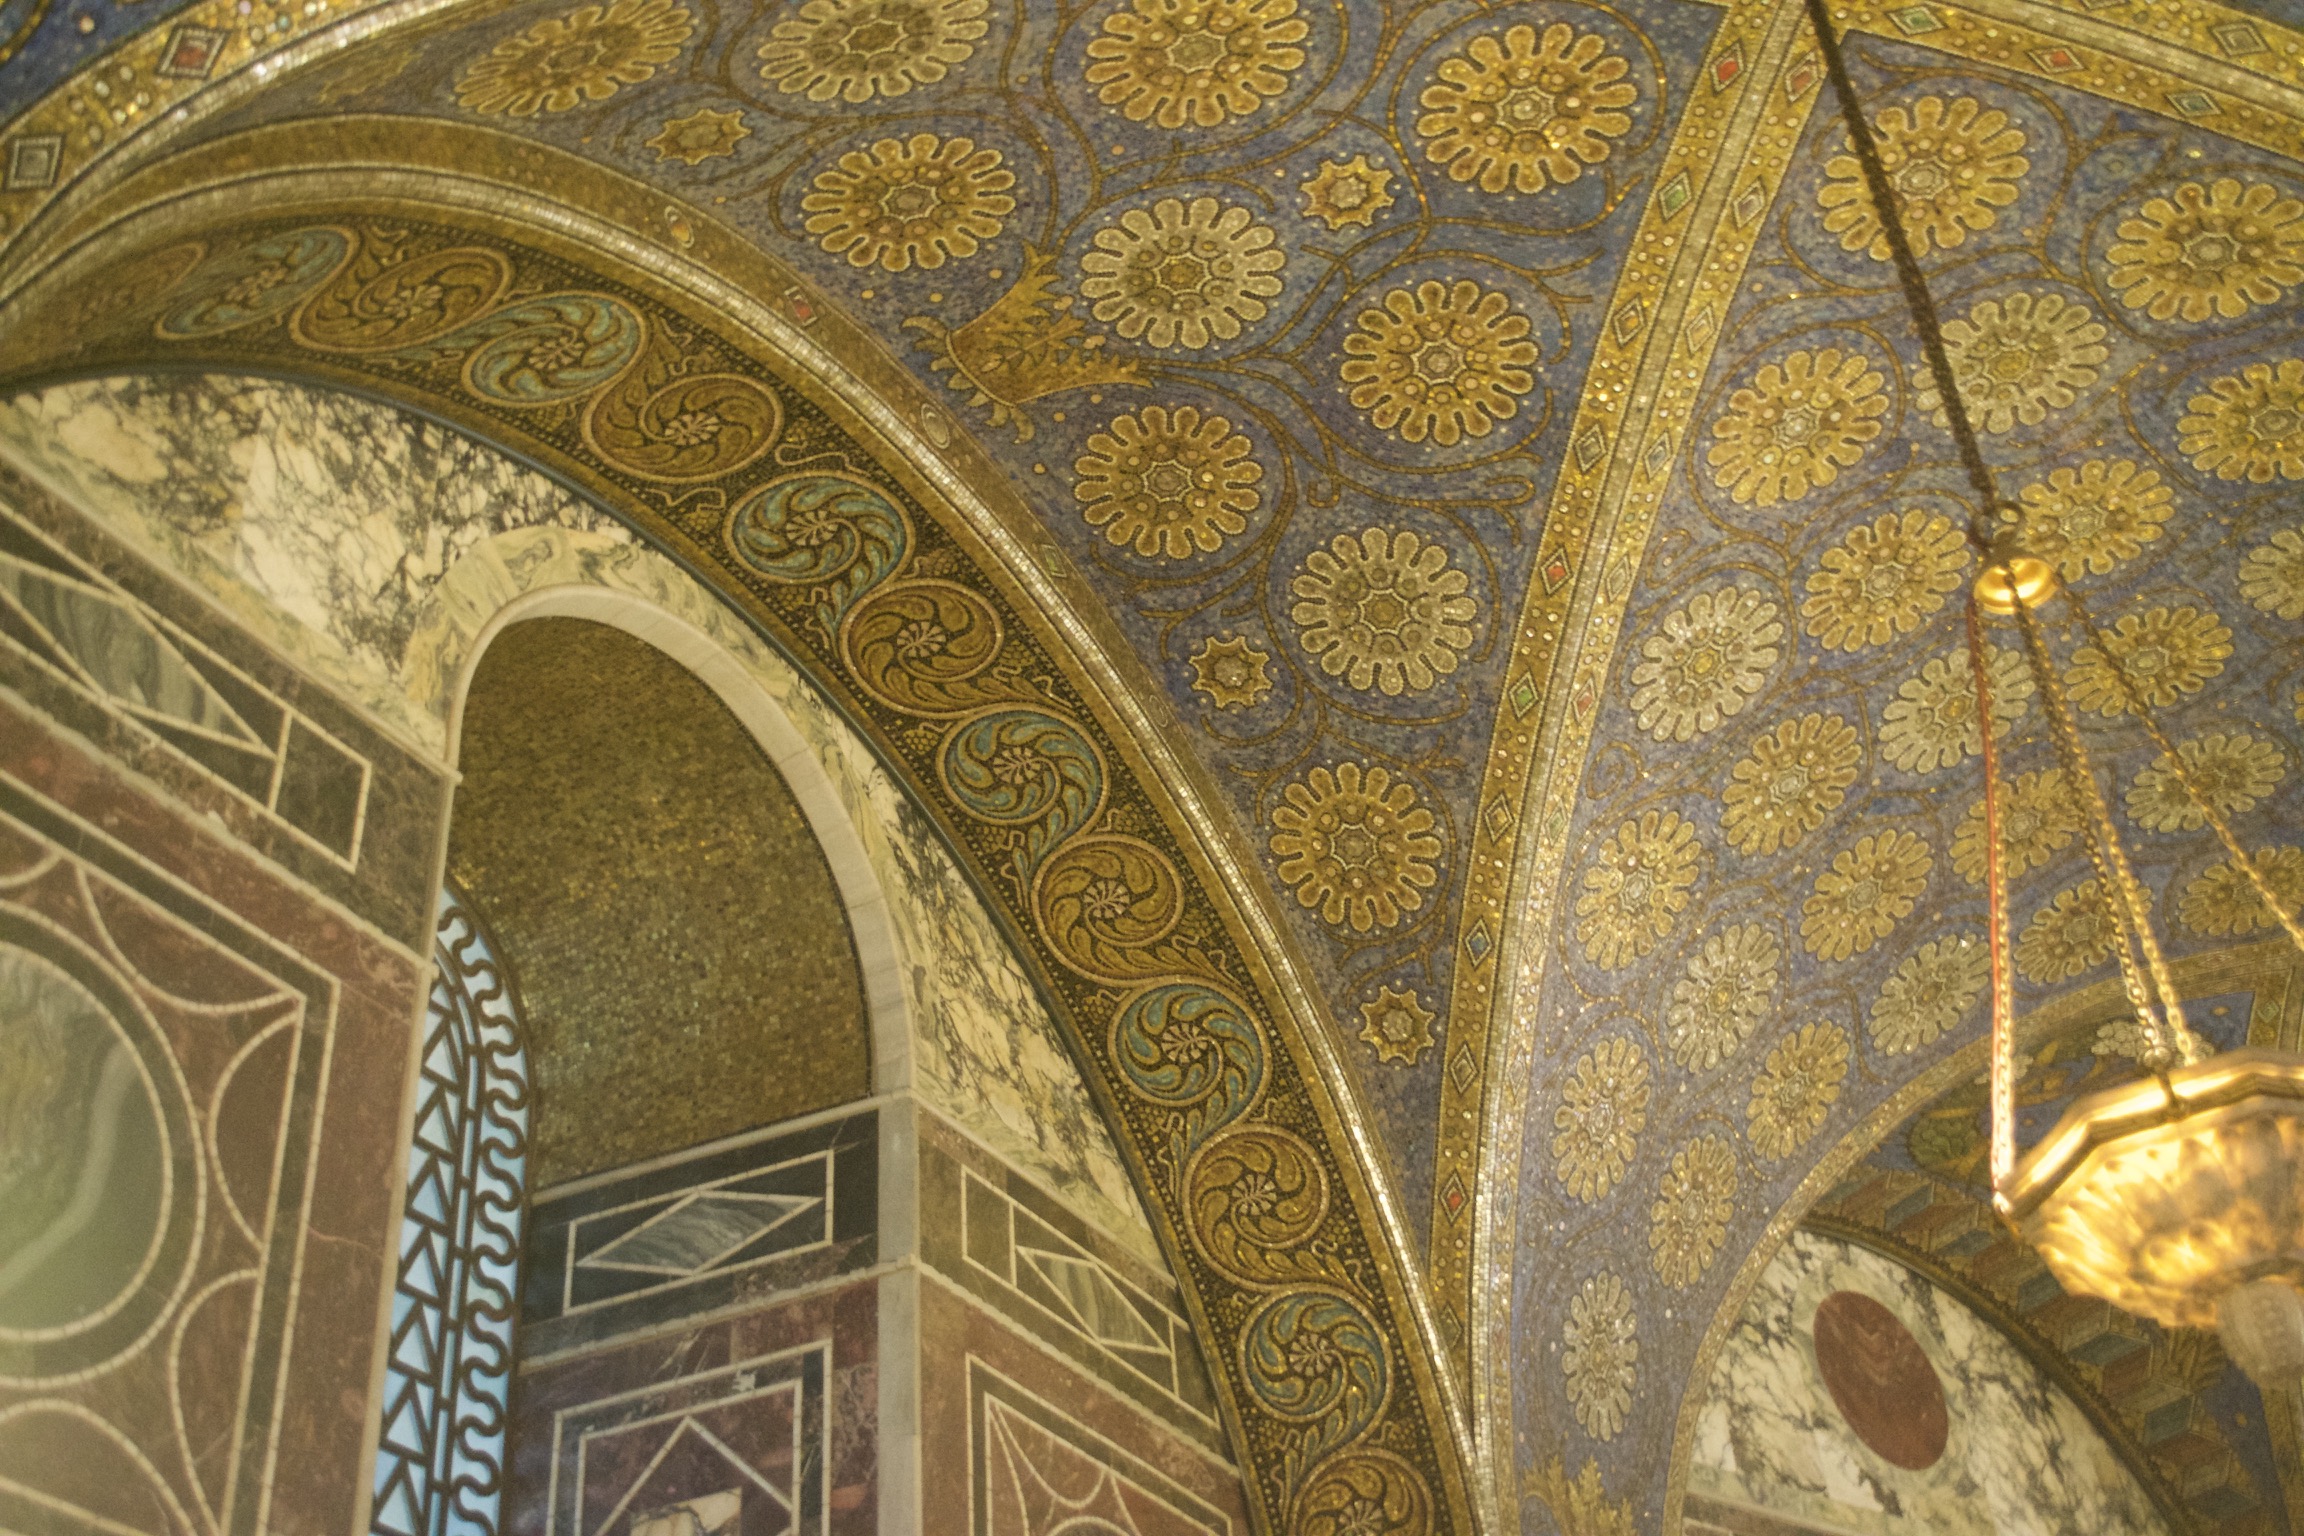 Marble and tile mosaics cover a ceiling and window arch in geometric and flowered designs.